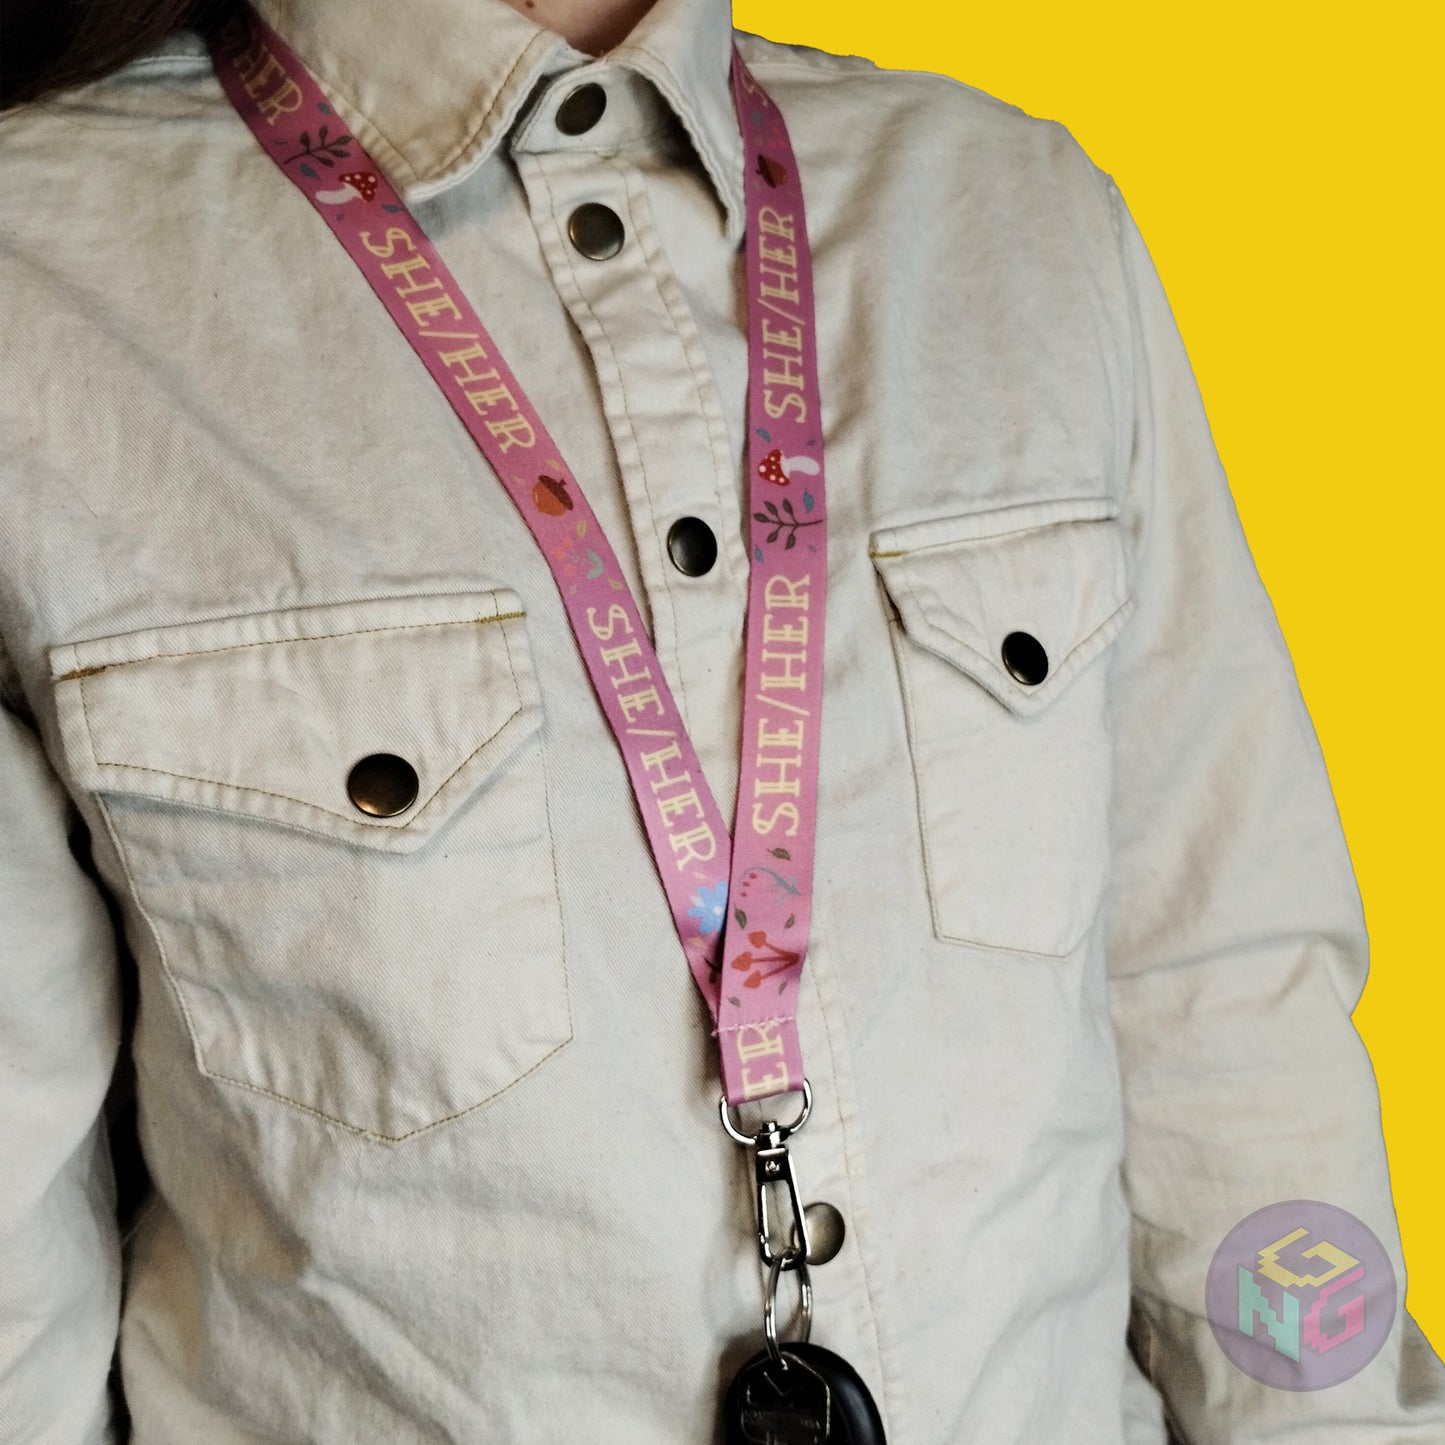 pink she her mushroom lanyard being worn by a flat chested person wearing a cream button up. The end of the lanyard falls between their sternum and bellybutton and has a key fob clipped to the end